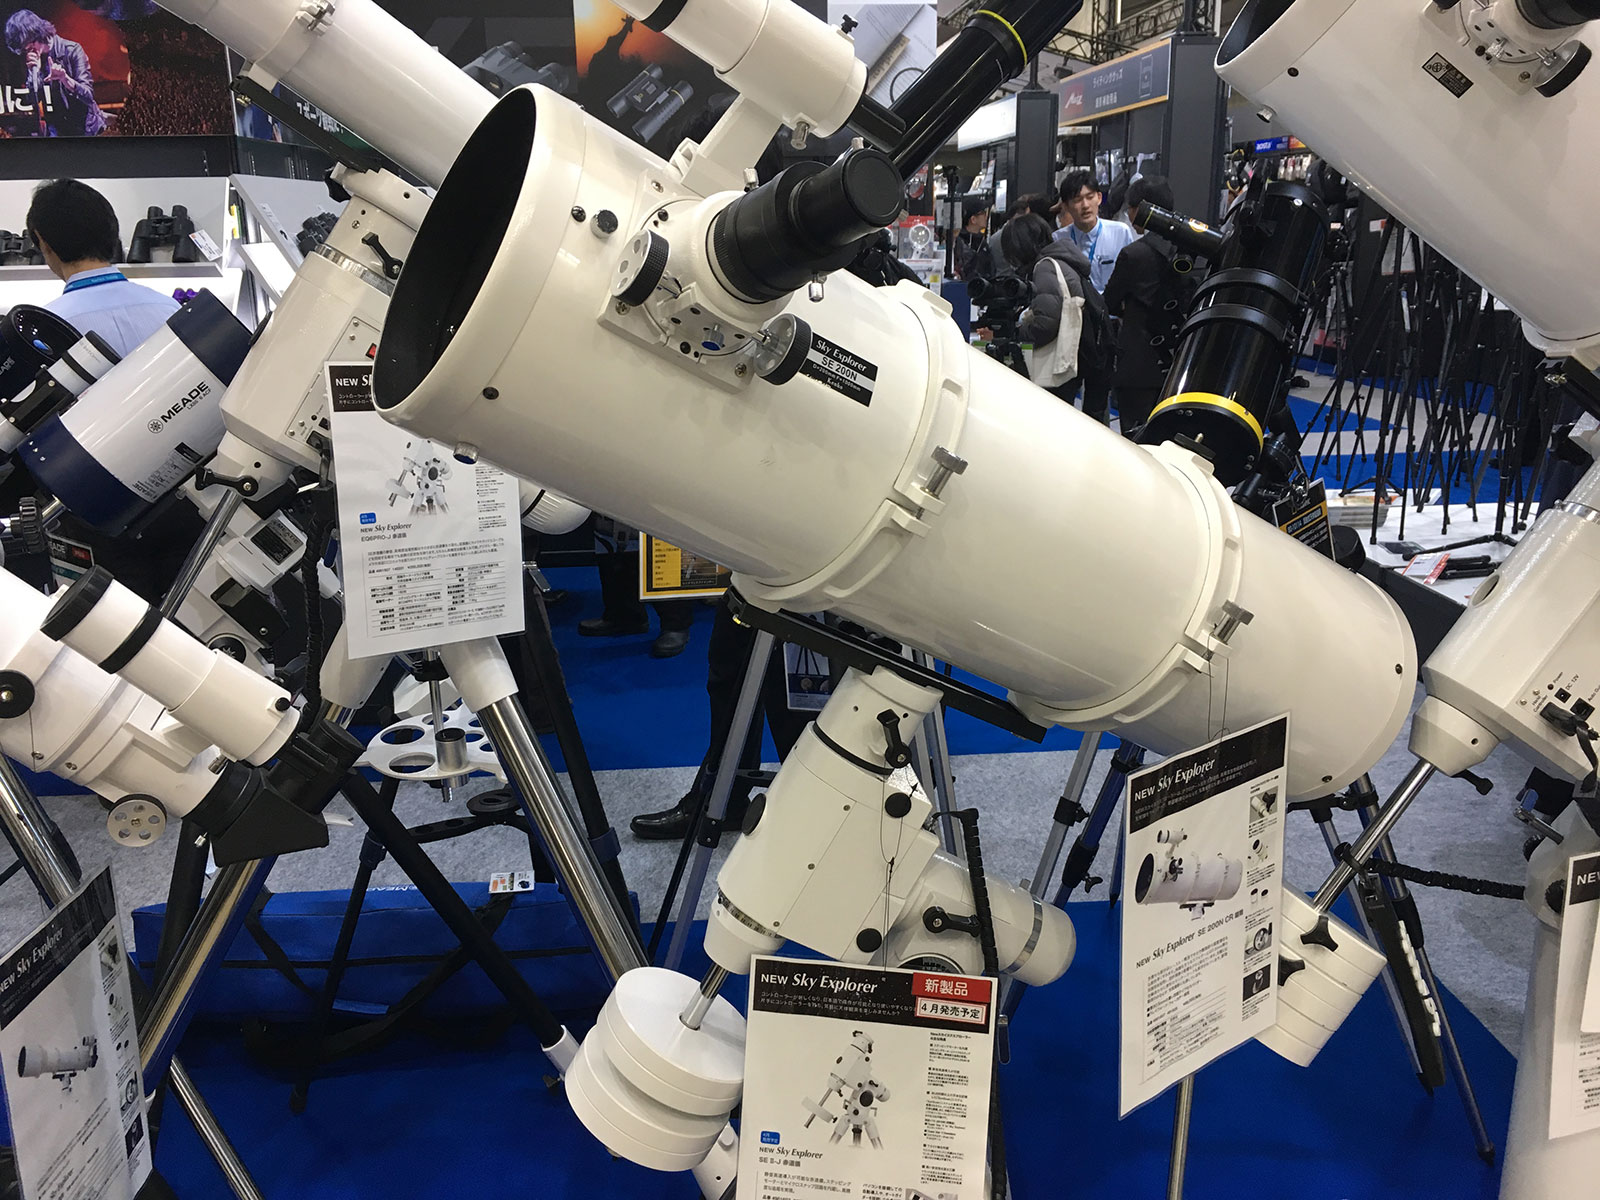 Kenko New Sky Explorer series is our ultimate recommended choice for those who are already into astronomy and need a high quality, reliable telescope.